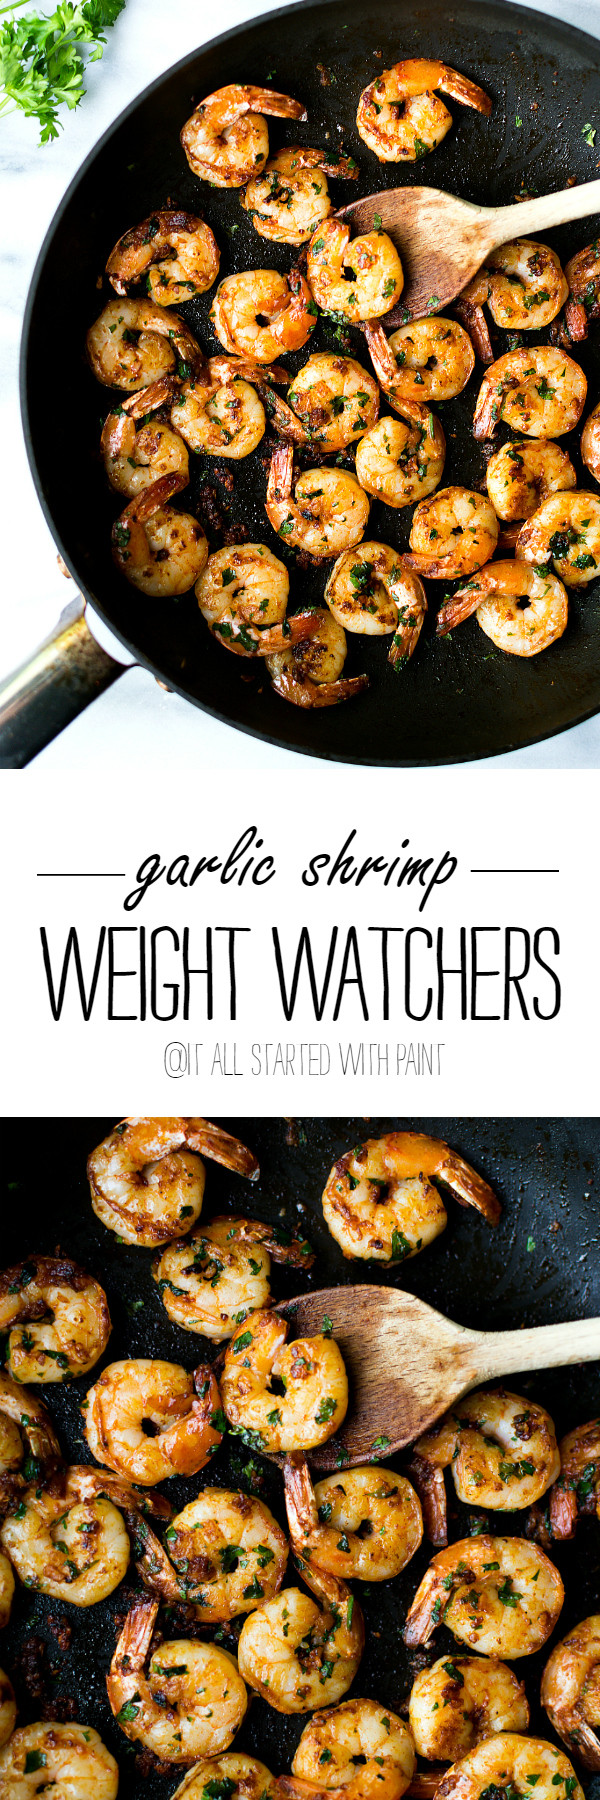 Weight Watchers Dinner Recipes
 Weight Watchers Garlic Shrimp Recipe It All Started With